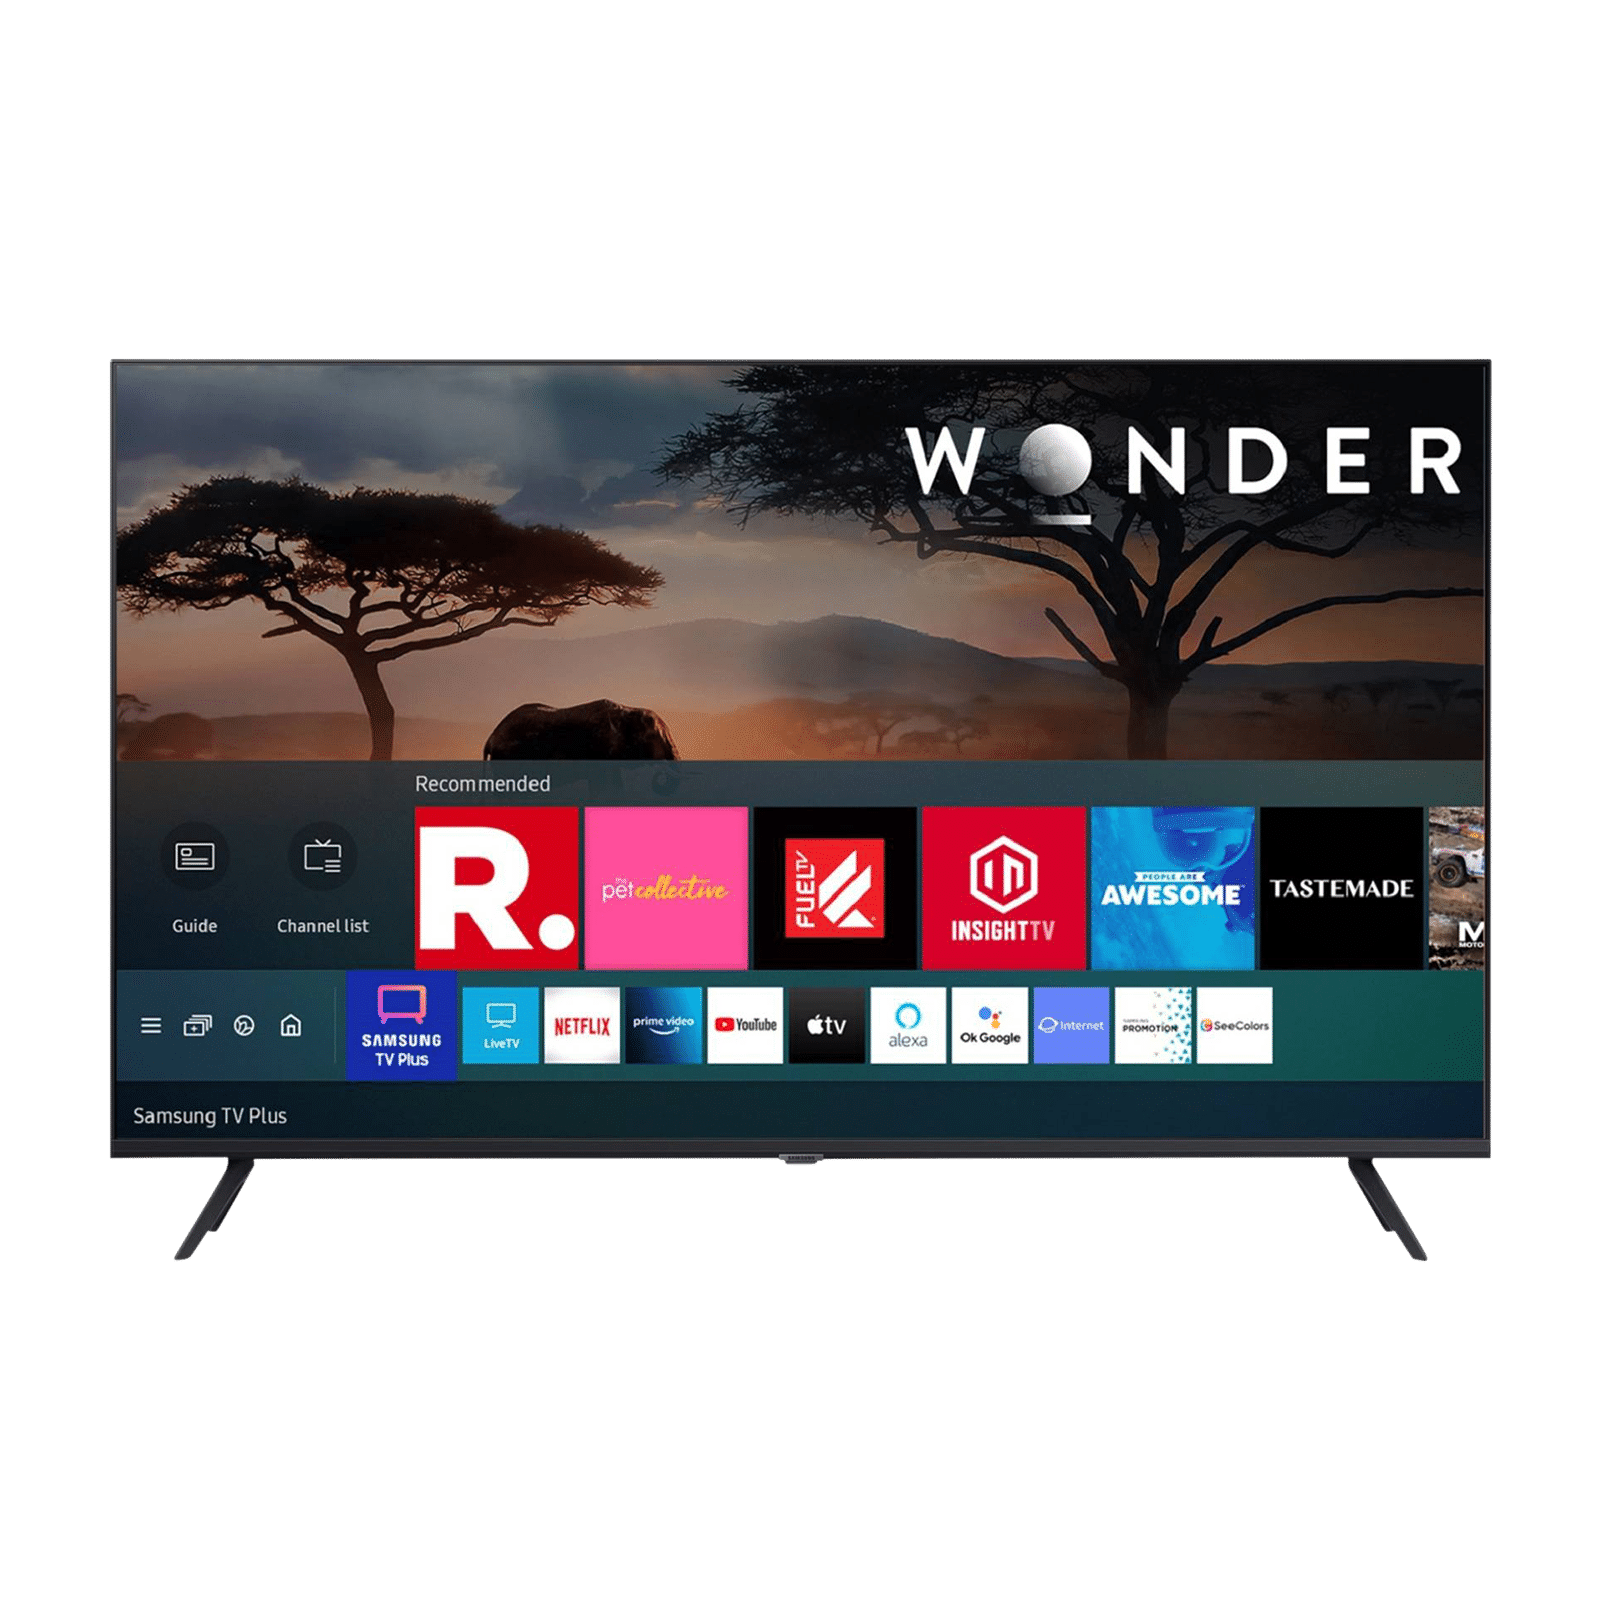 [For ICICI Bank Credit Card] SAMSUNG Crystal 4K Neo 108 cm (43 inch) 4K Ultra HD LED Tizen TV with Voice Assistance (2022 model)